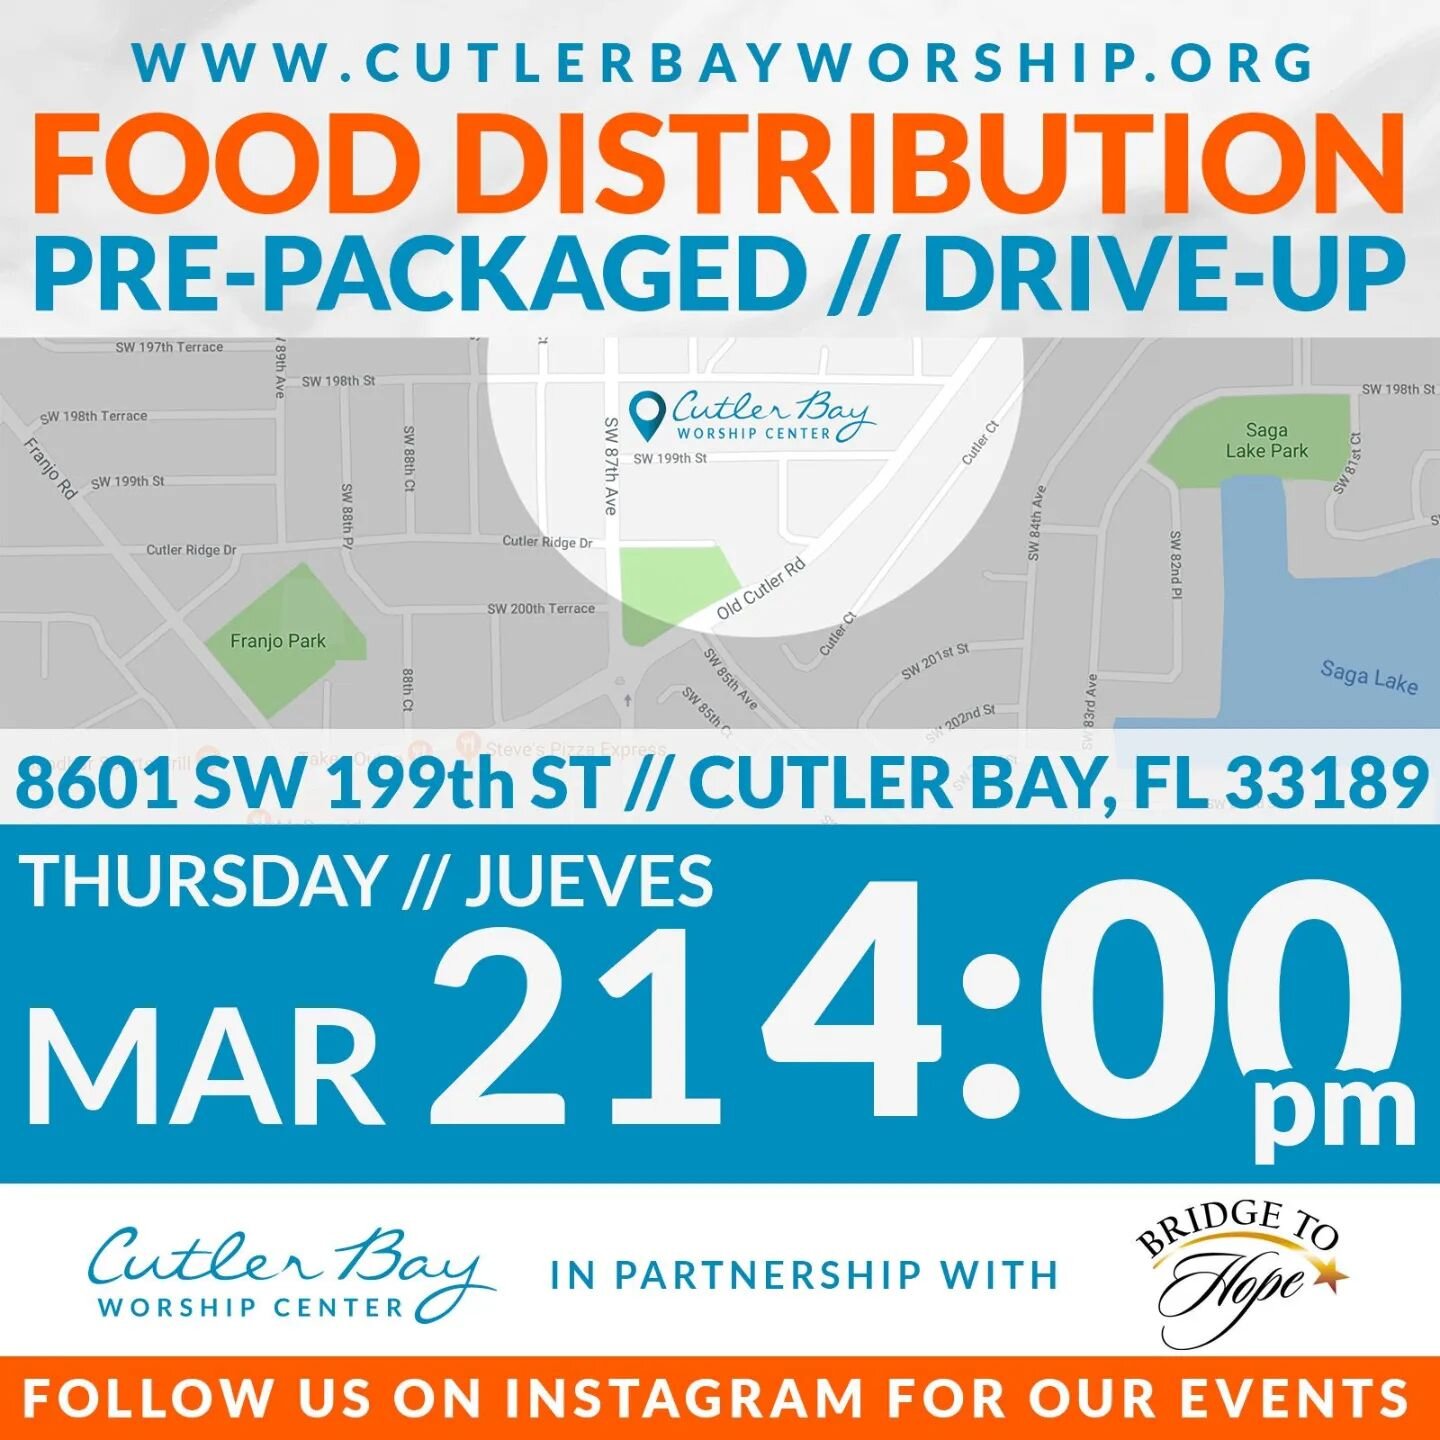 Food Distribution today at 4pm!! See you there!

Cutler Bay Worship Center
8601 SW 199th Street 

#fooddistribution 
#cutlerbayworshipcenter